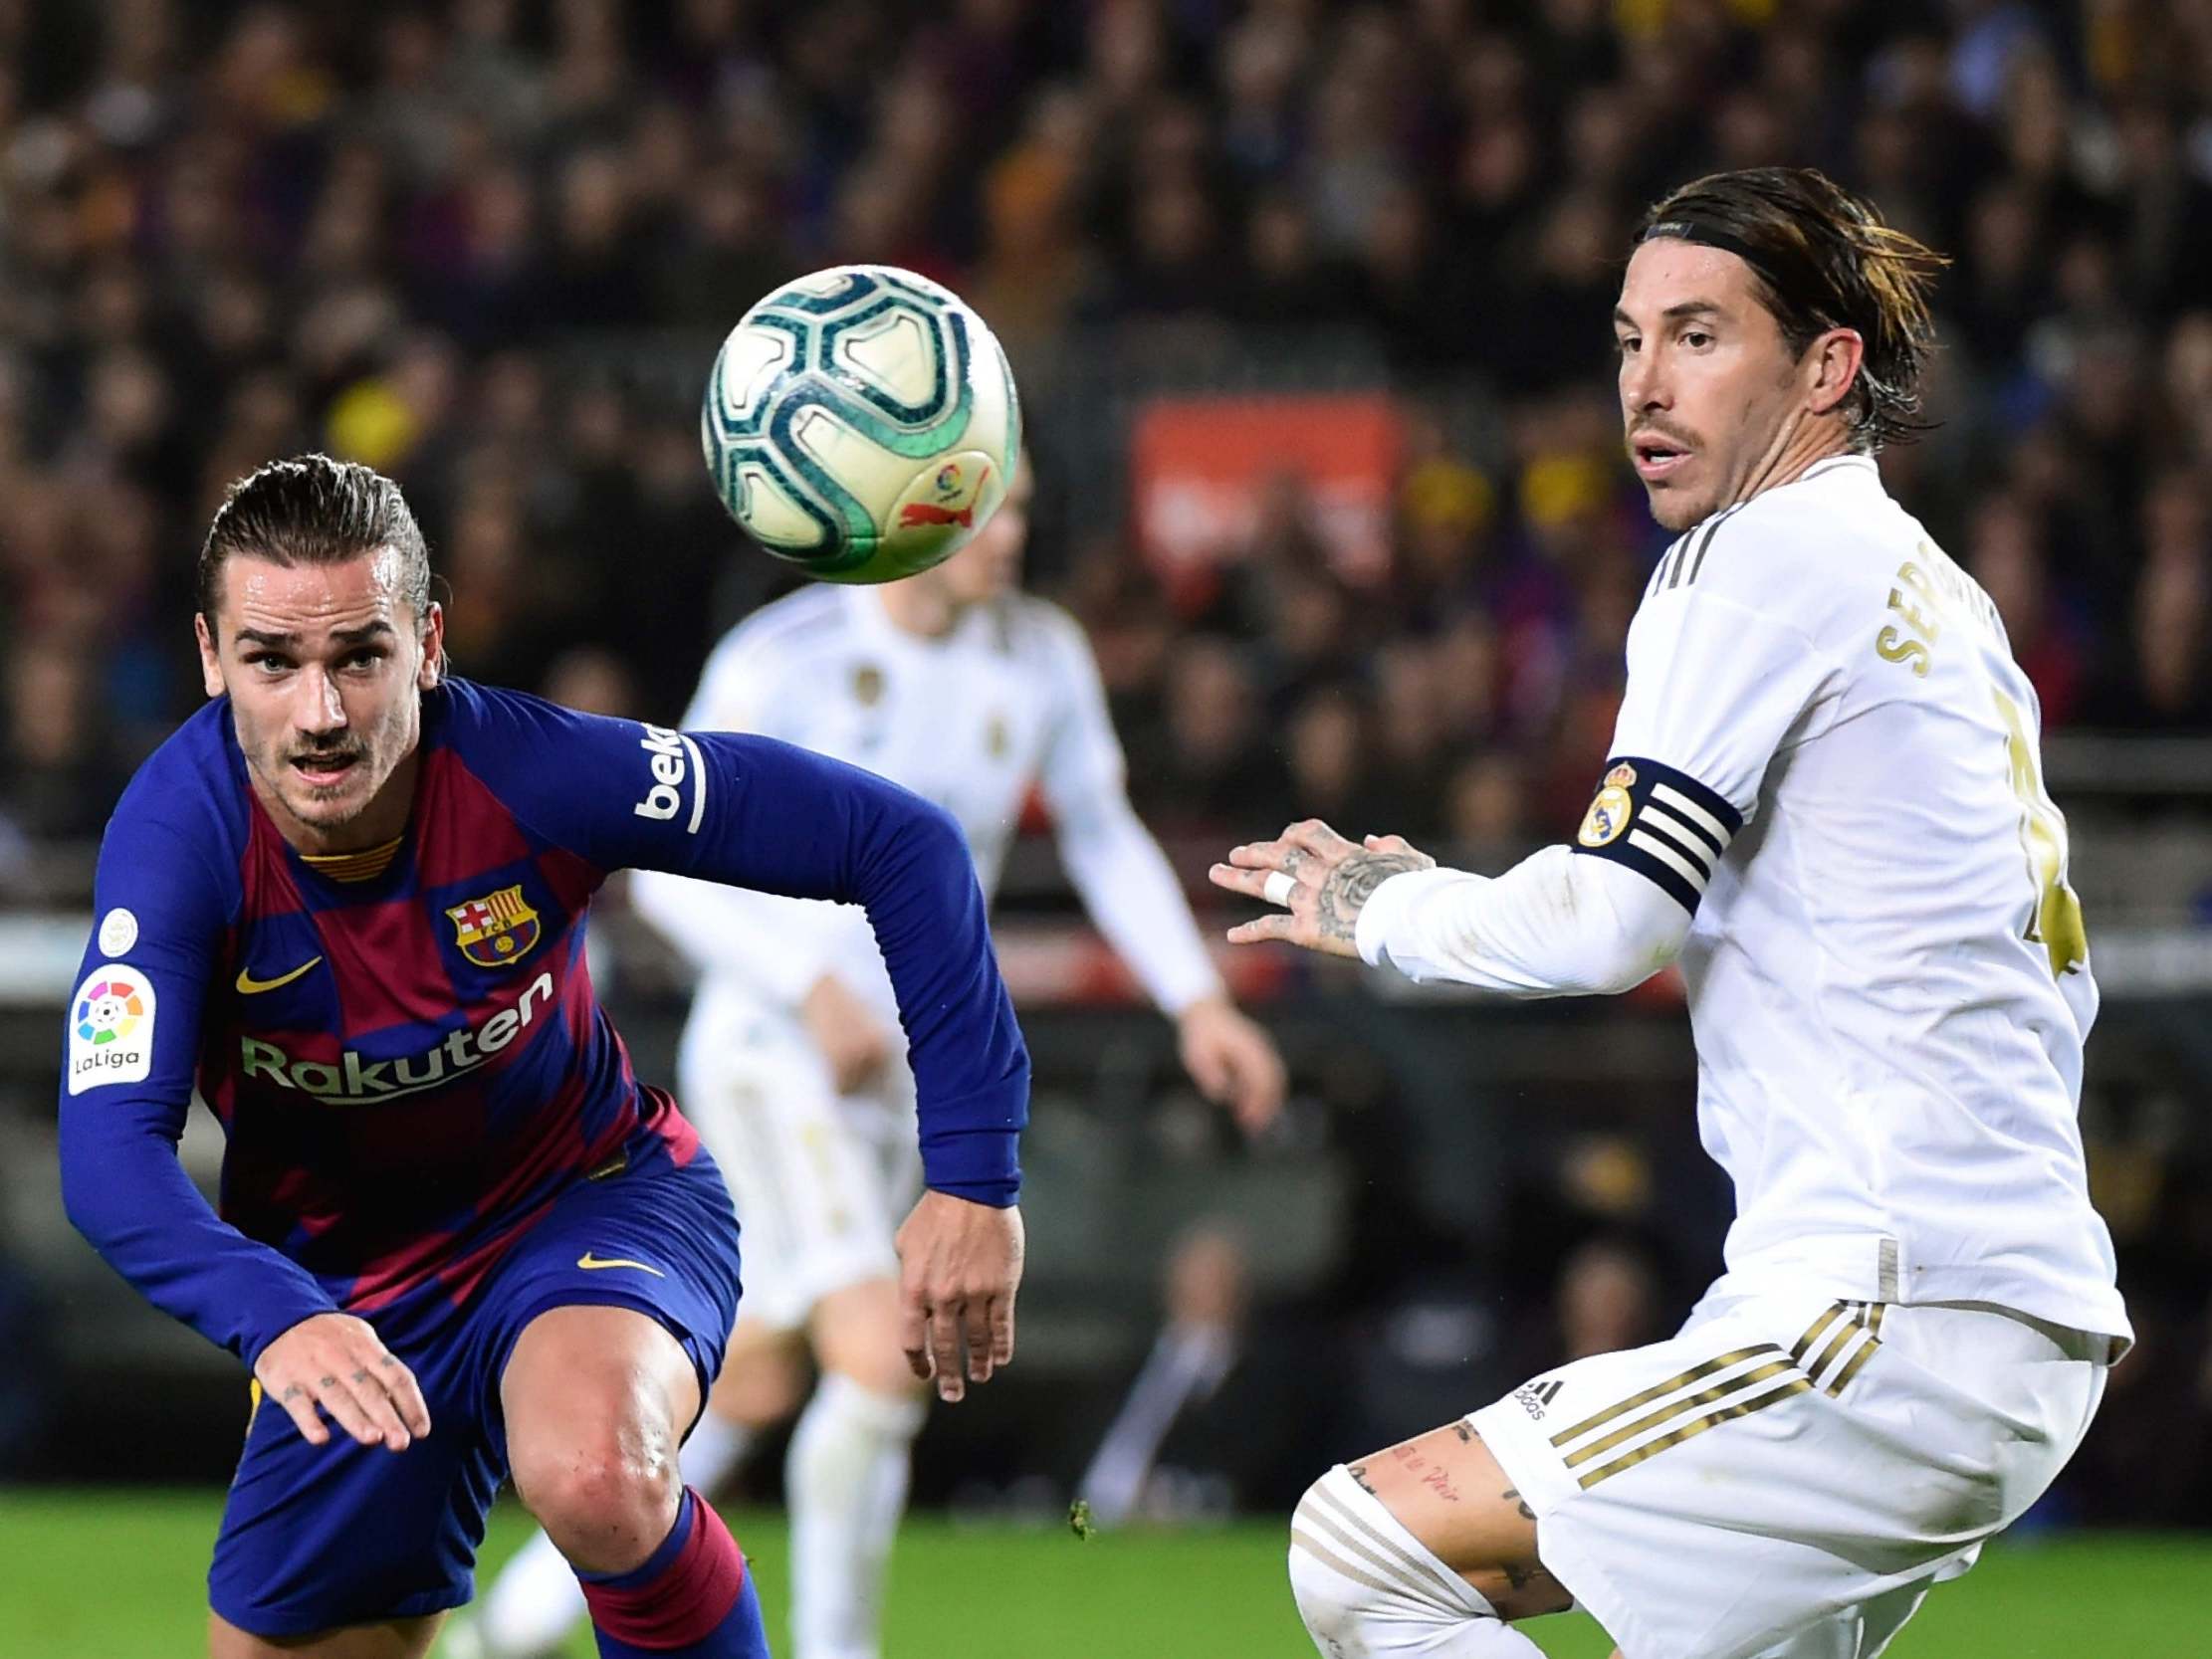 The Clasico between Barcelona and Real Madrid remains La Liga's prize asset